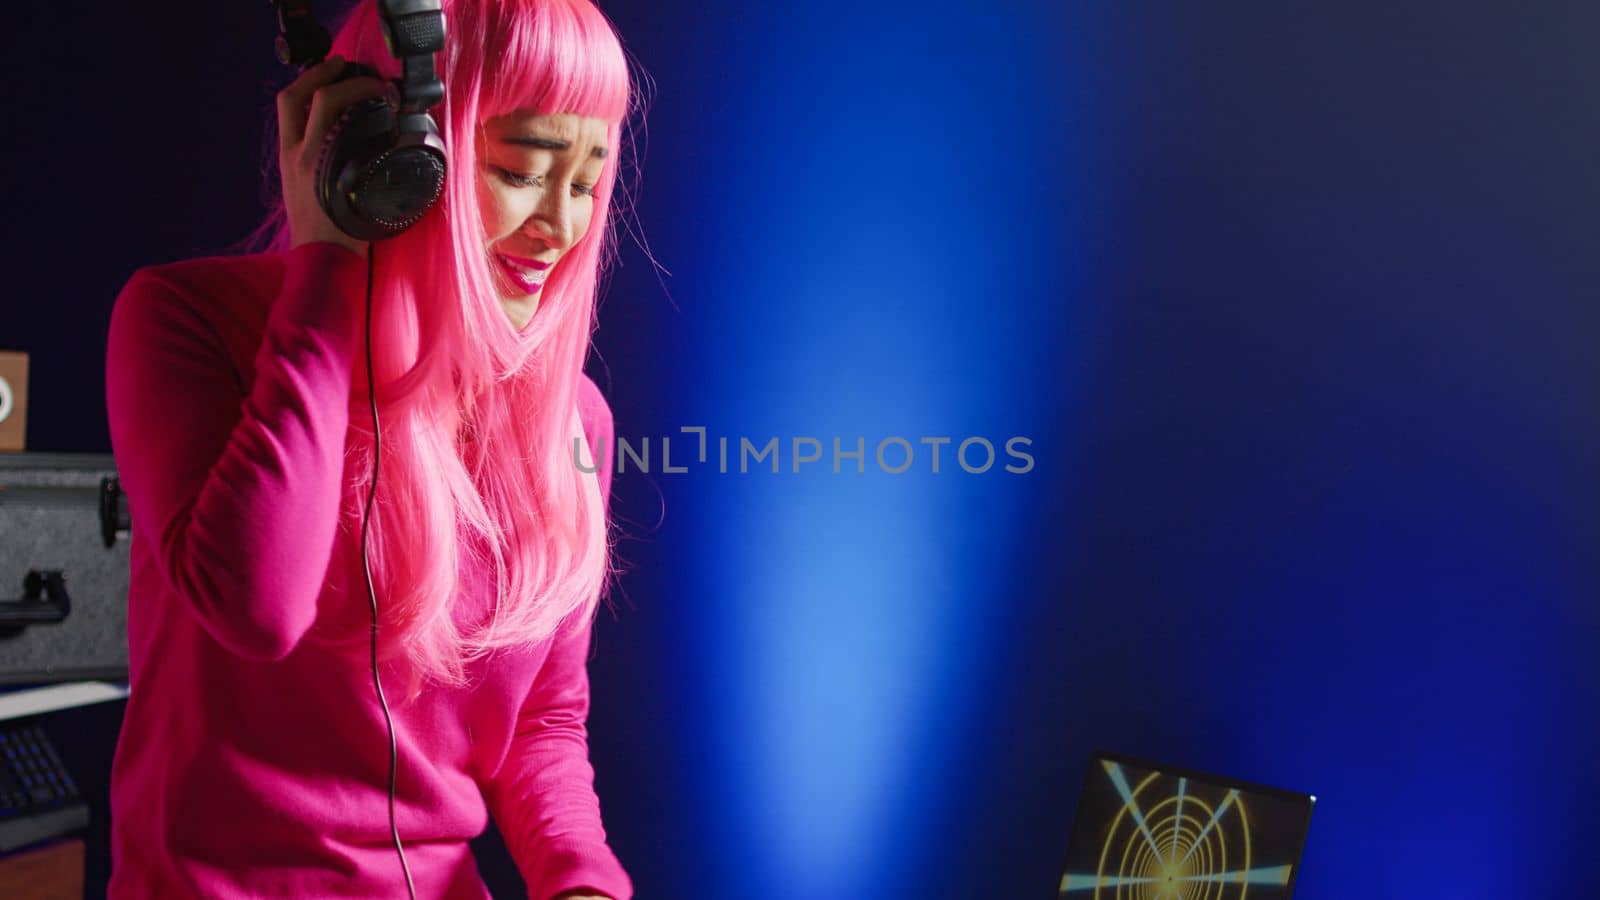 Dj with pink hair playing eletronic song at professional mixer console, listening music into headset. Asian perfomer enjoying mixing sounds, dancing with fans during night time in club.